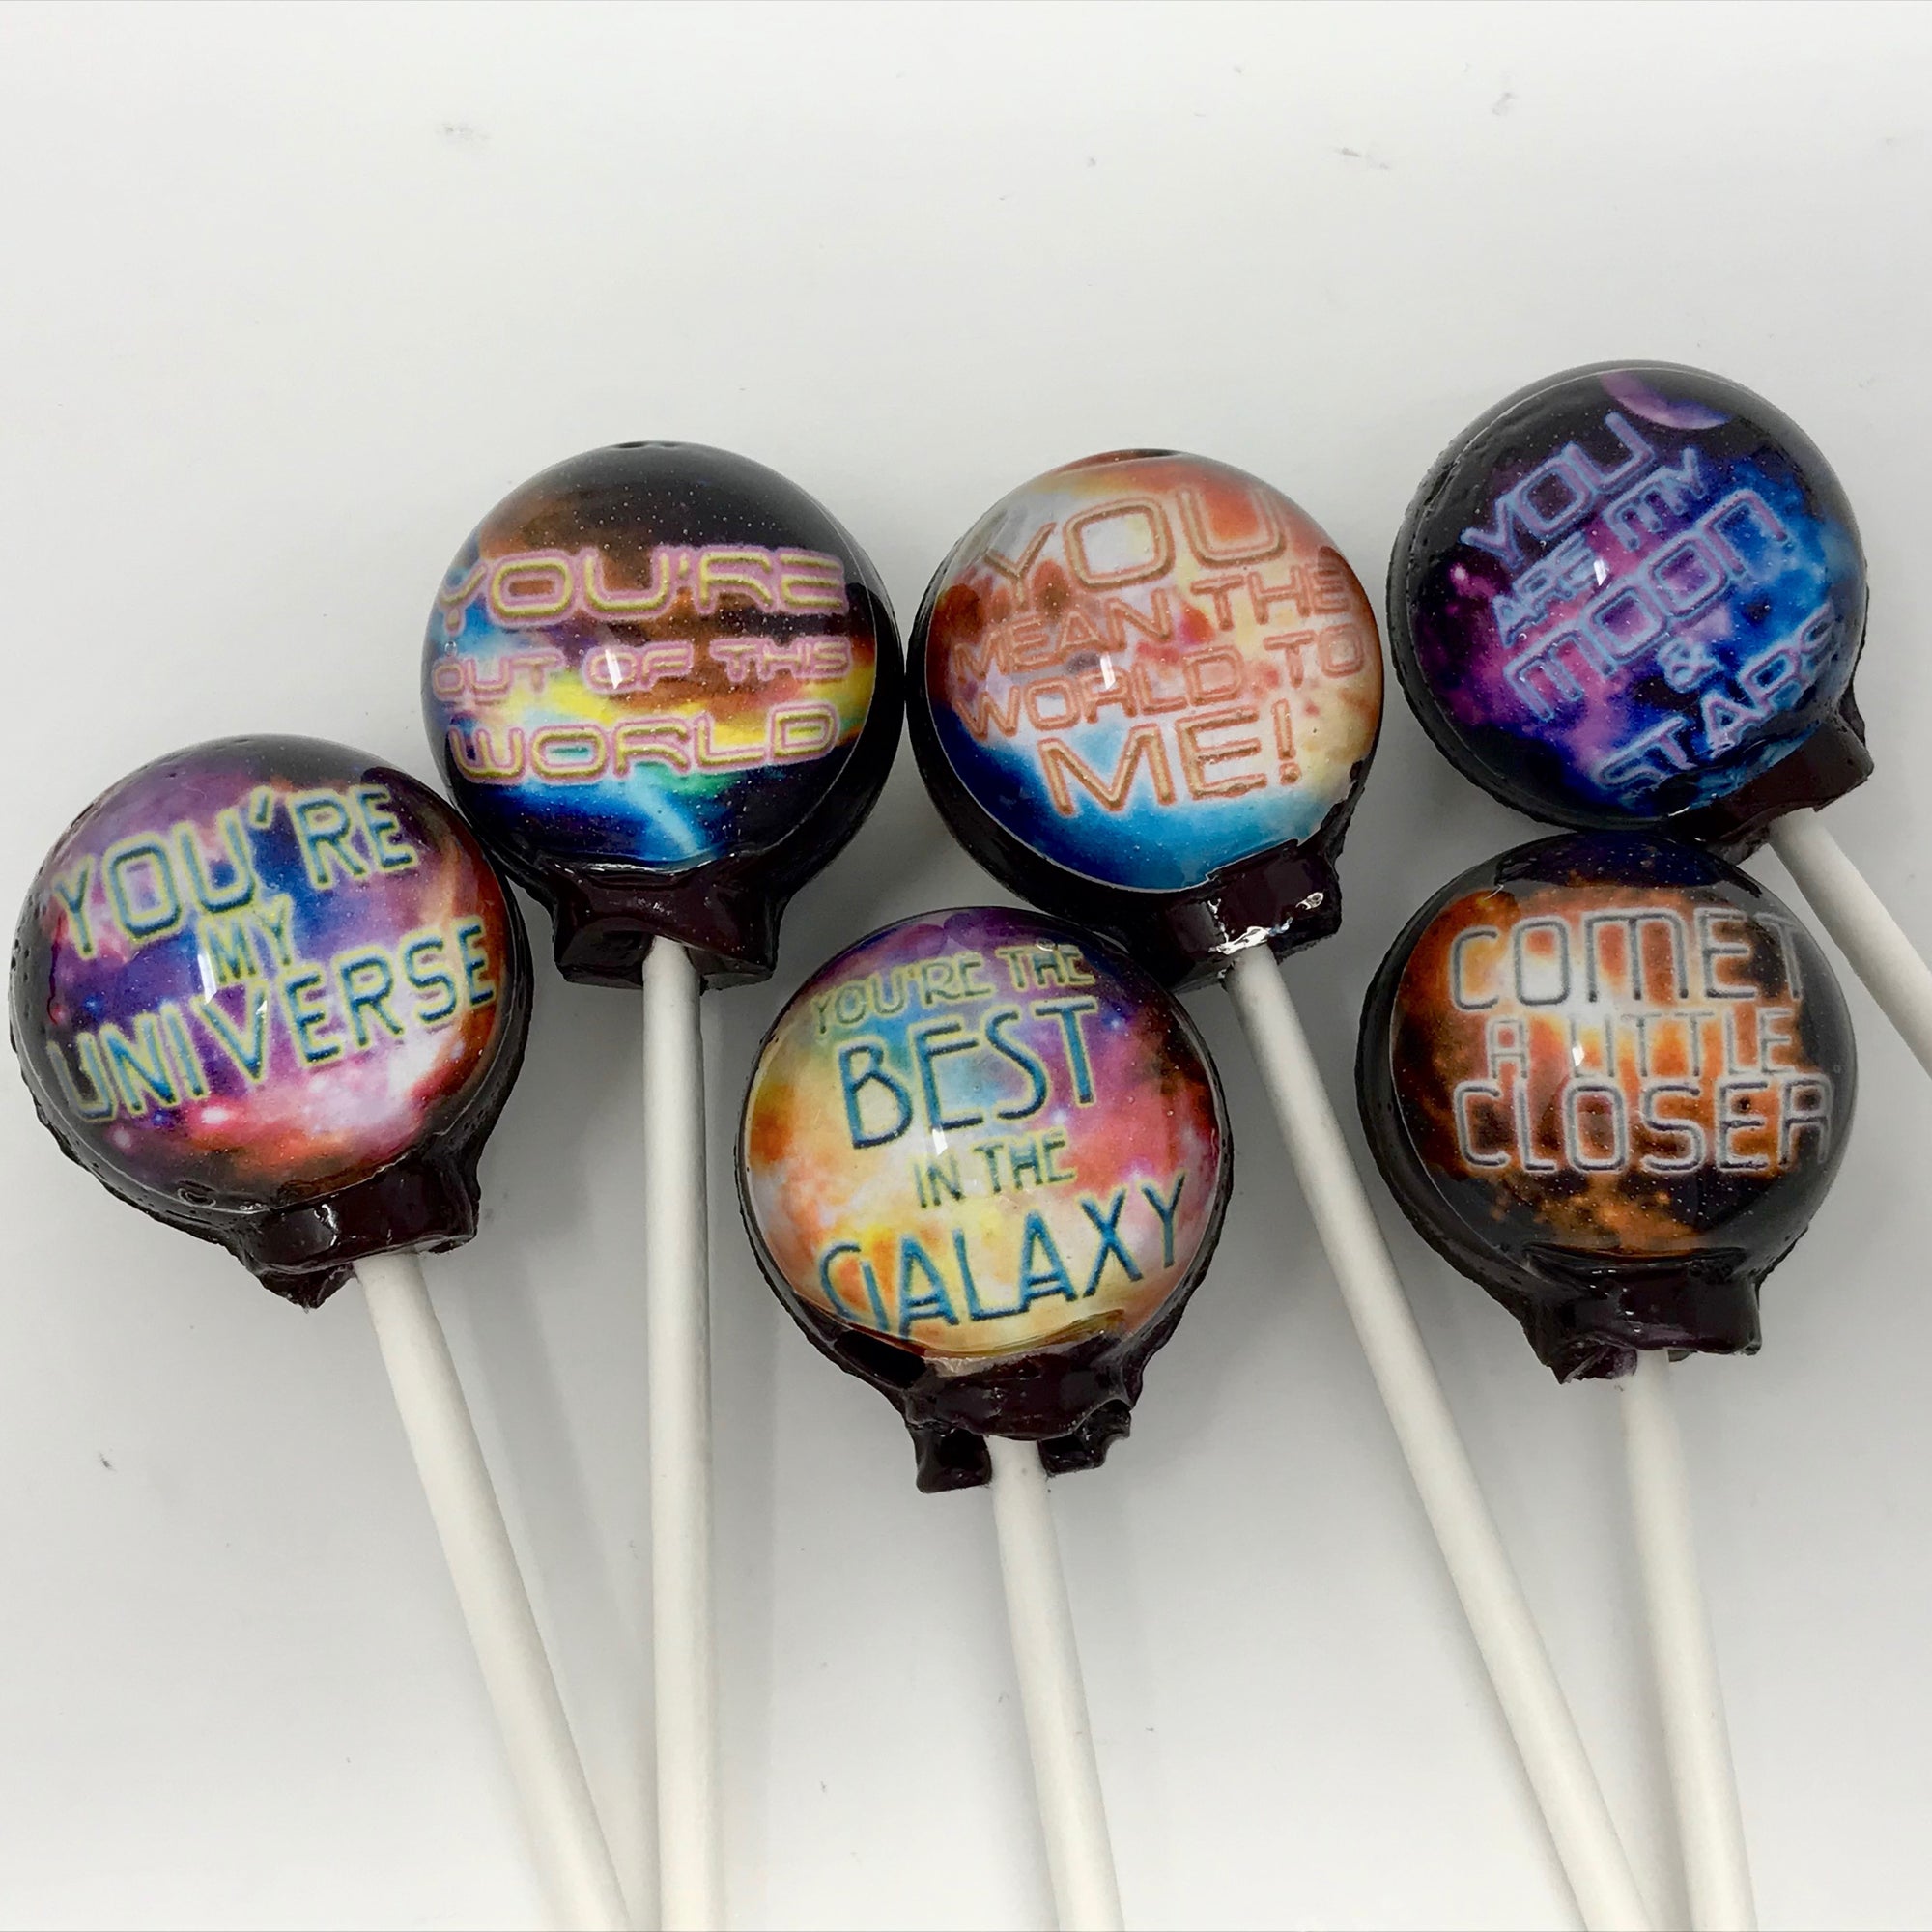 You're The Best In The Galaxy Lollipops 6-piece set by I Want Candy!